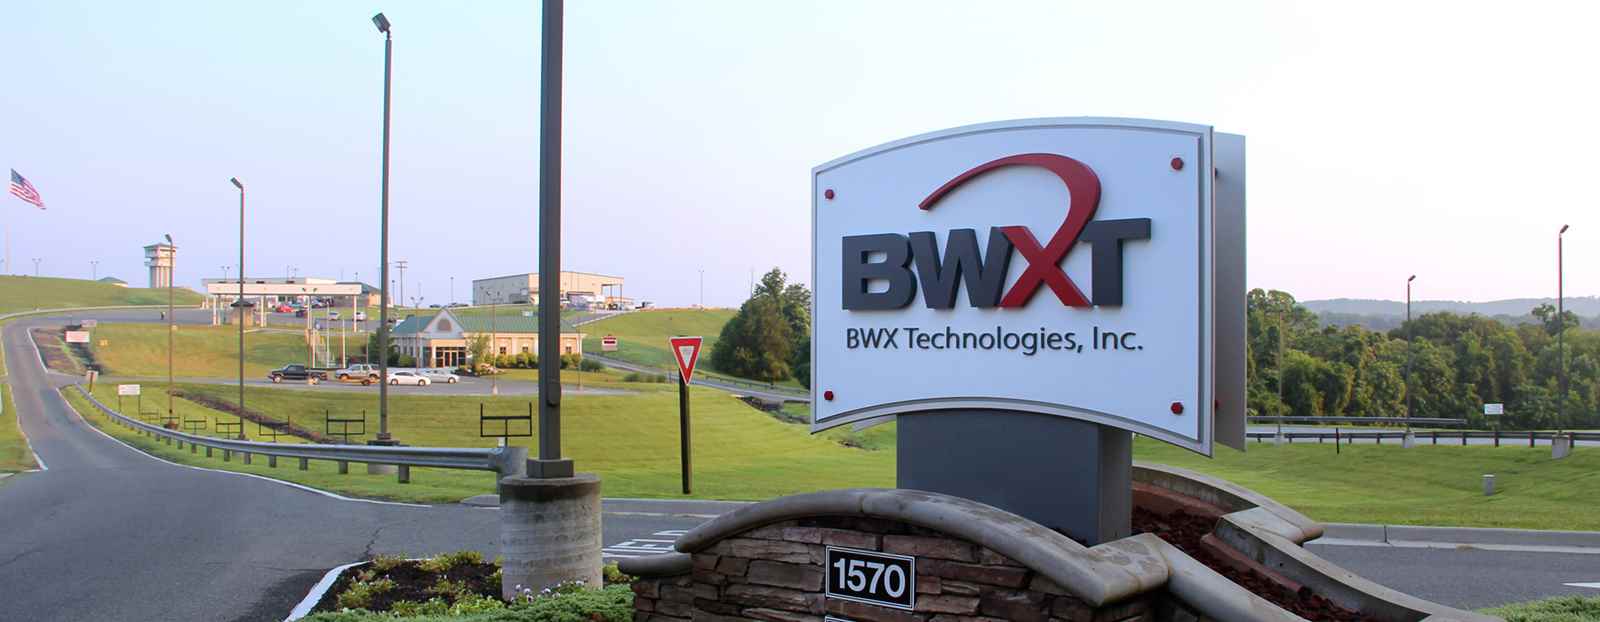 Tube troubles continue at BWXT, but earnings solid in 2Q – ExchangeMonitor